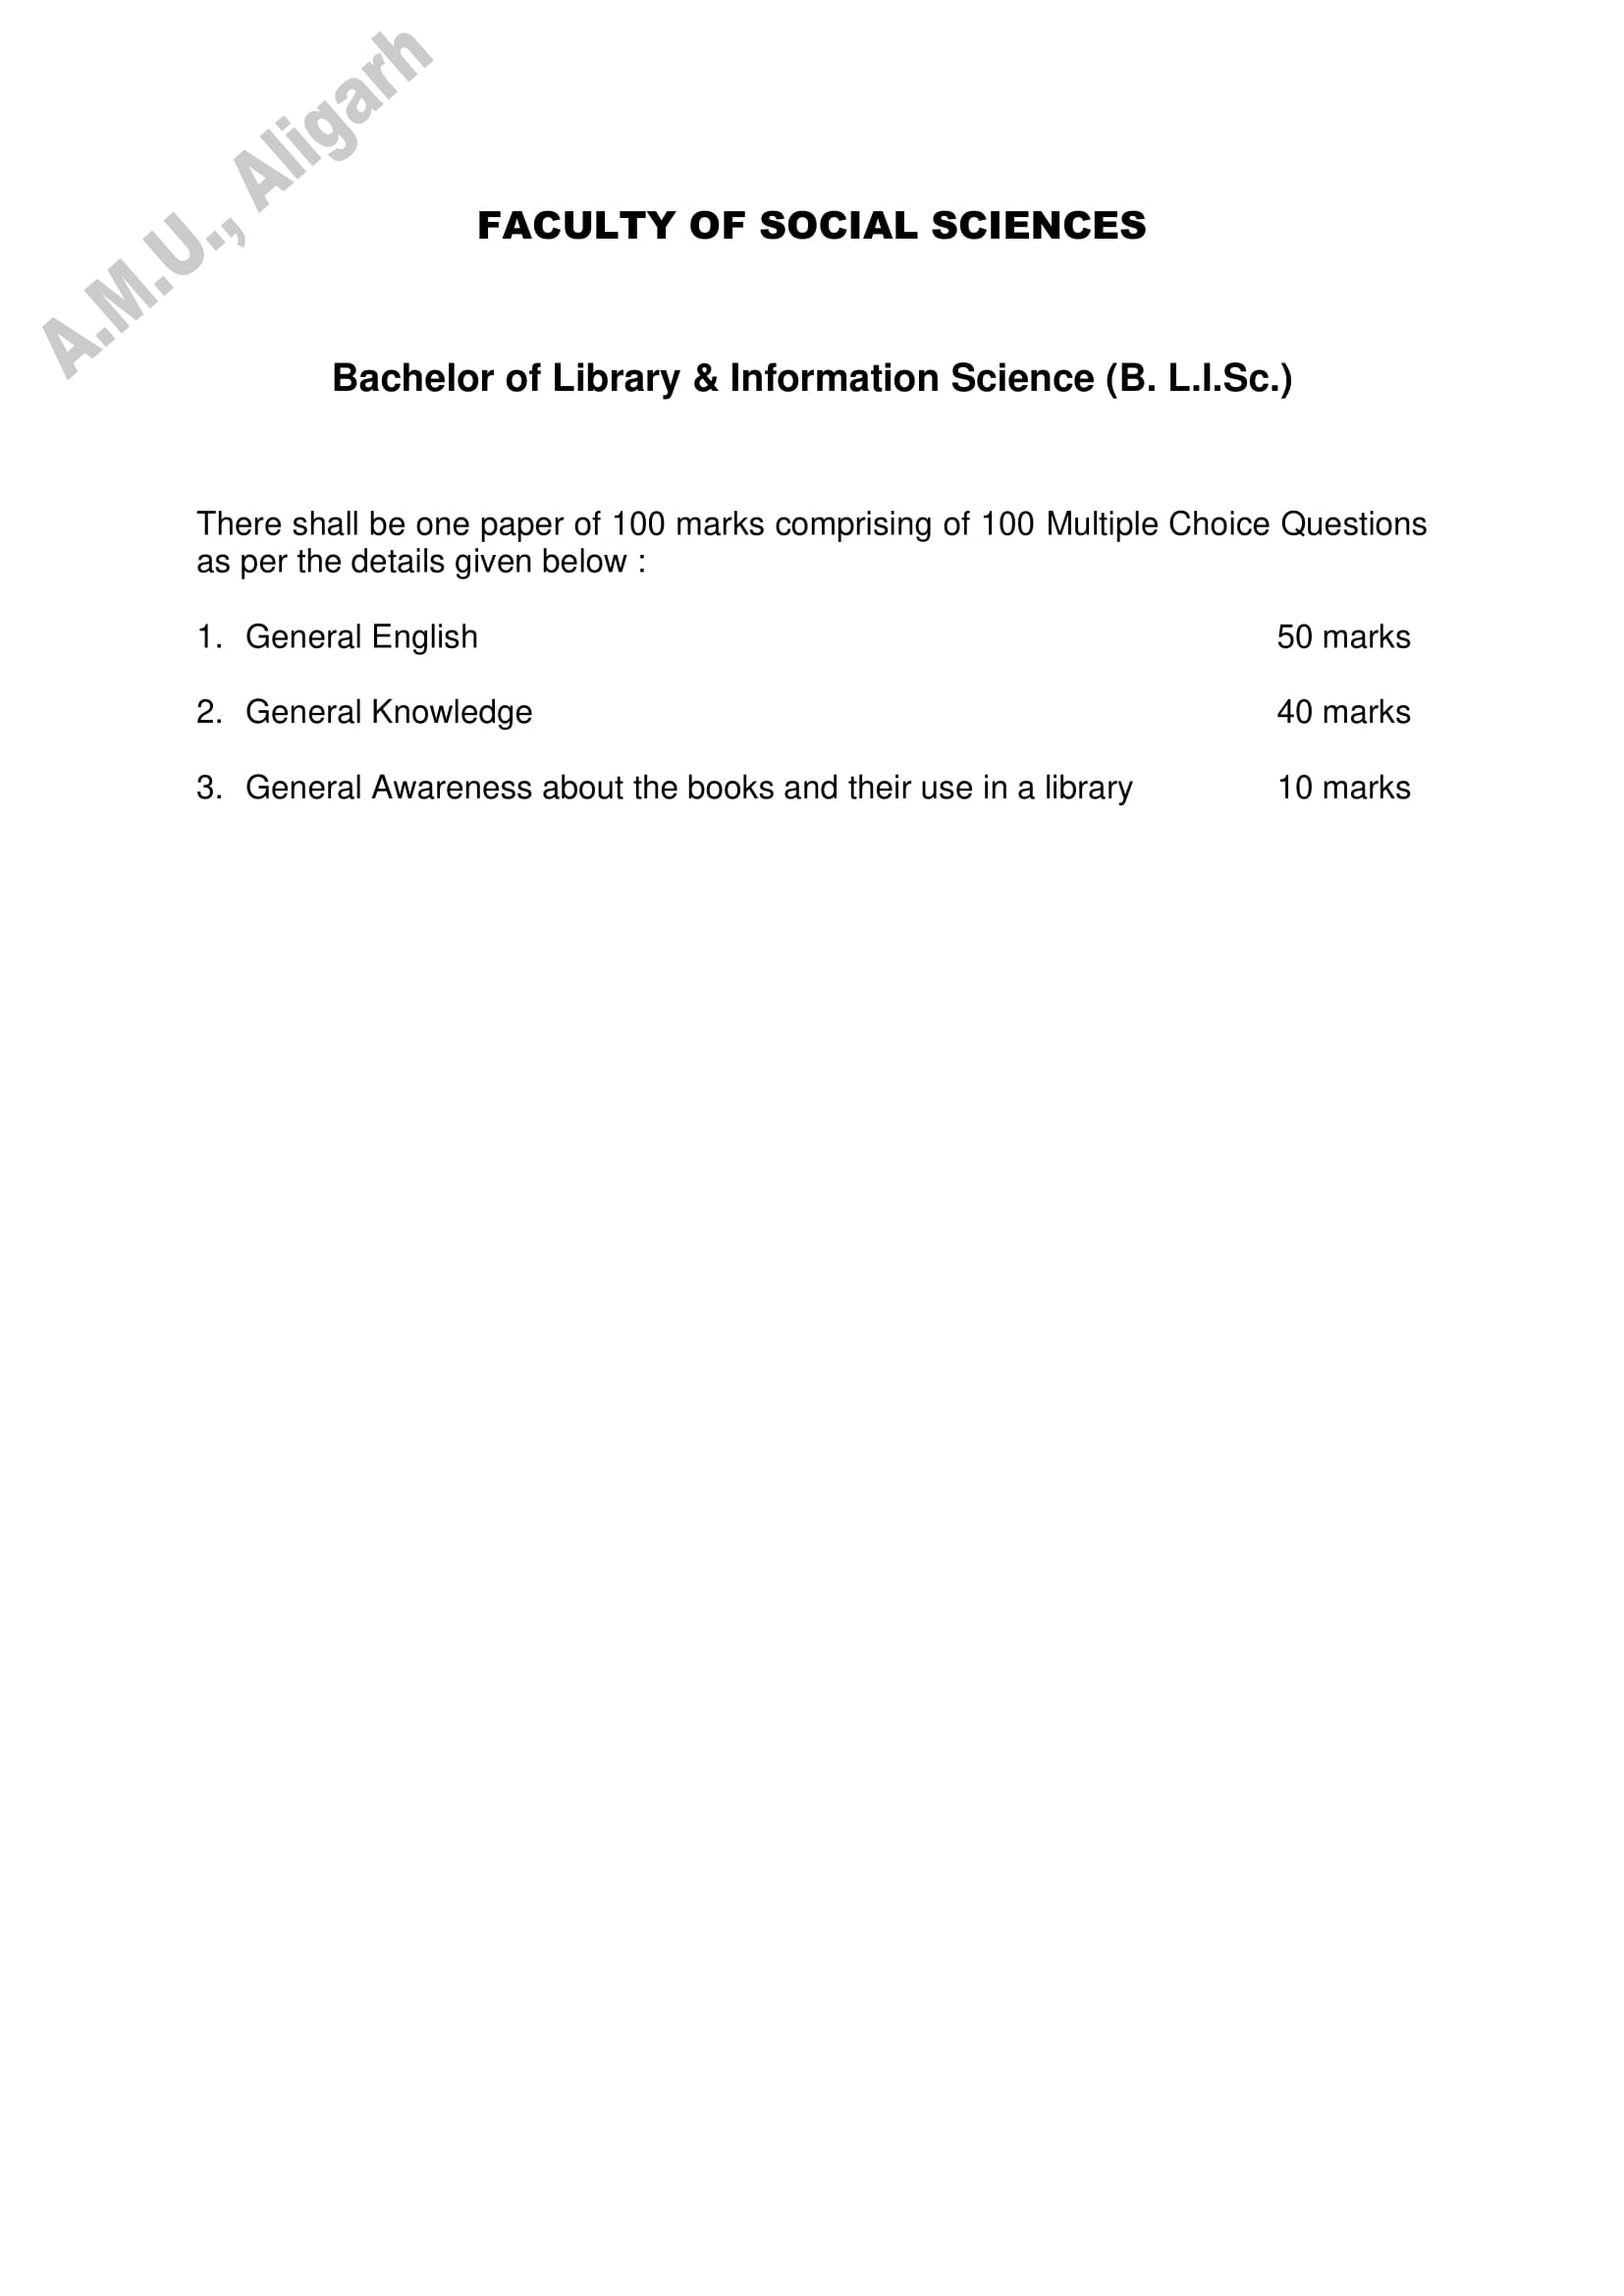 AMU Entrance Exam Syllabus for B.L.I.SC. in Library & Information Science - Page 1